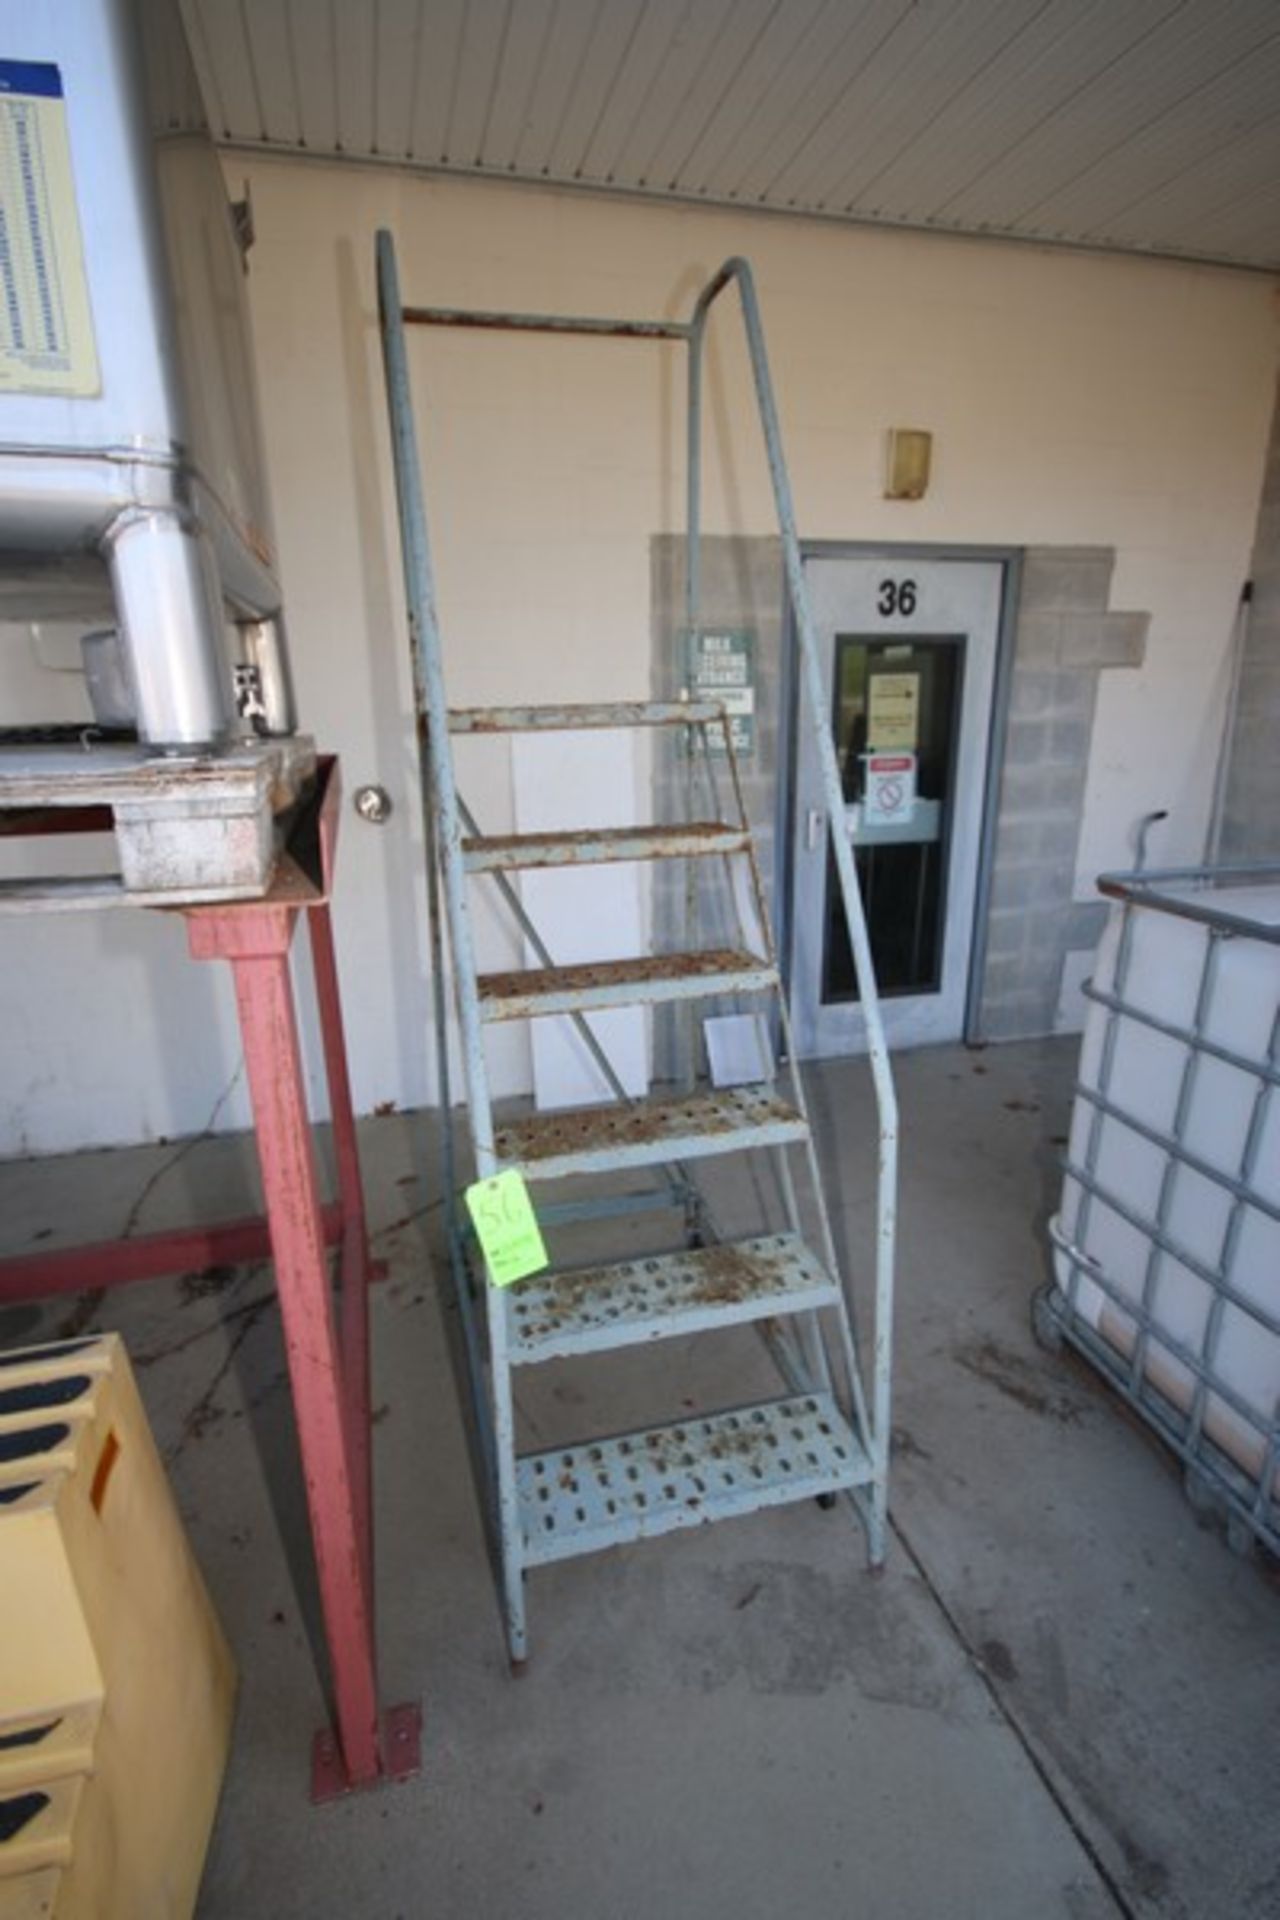 Portable 6-Step Stairs, Overall Dims.: Aprox. 42-1/2" L x 25-1/2" W x 9-1/2" H (Located in